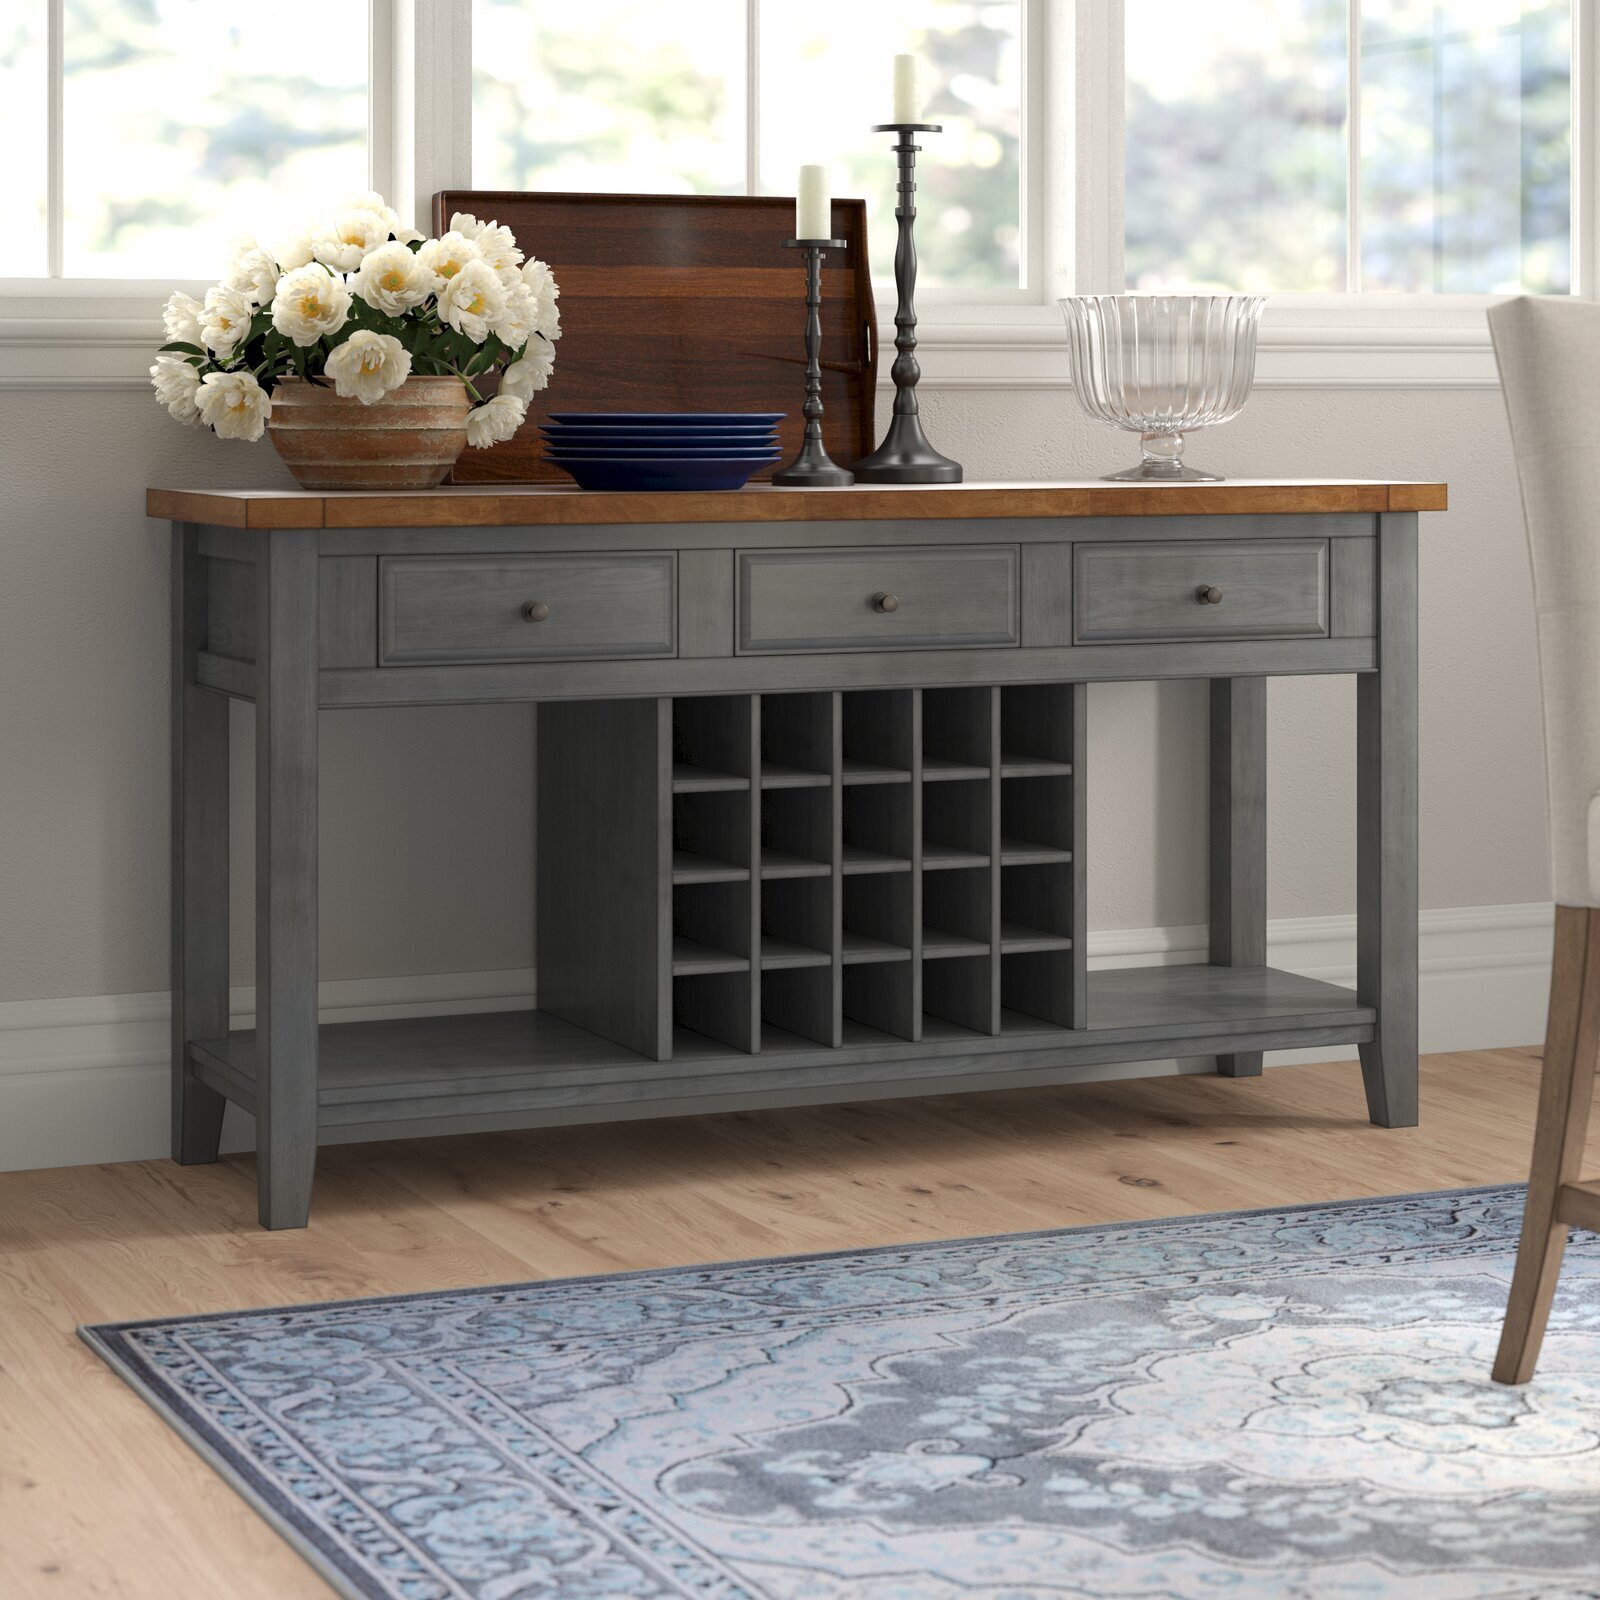 Sideboard Buffet with Wine Storage